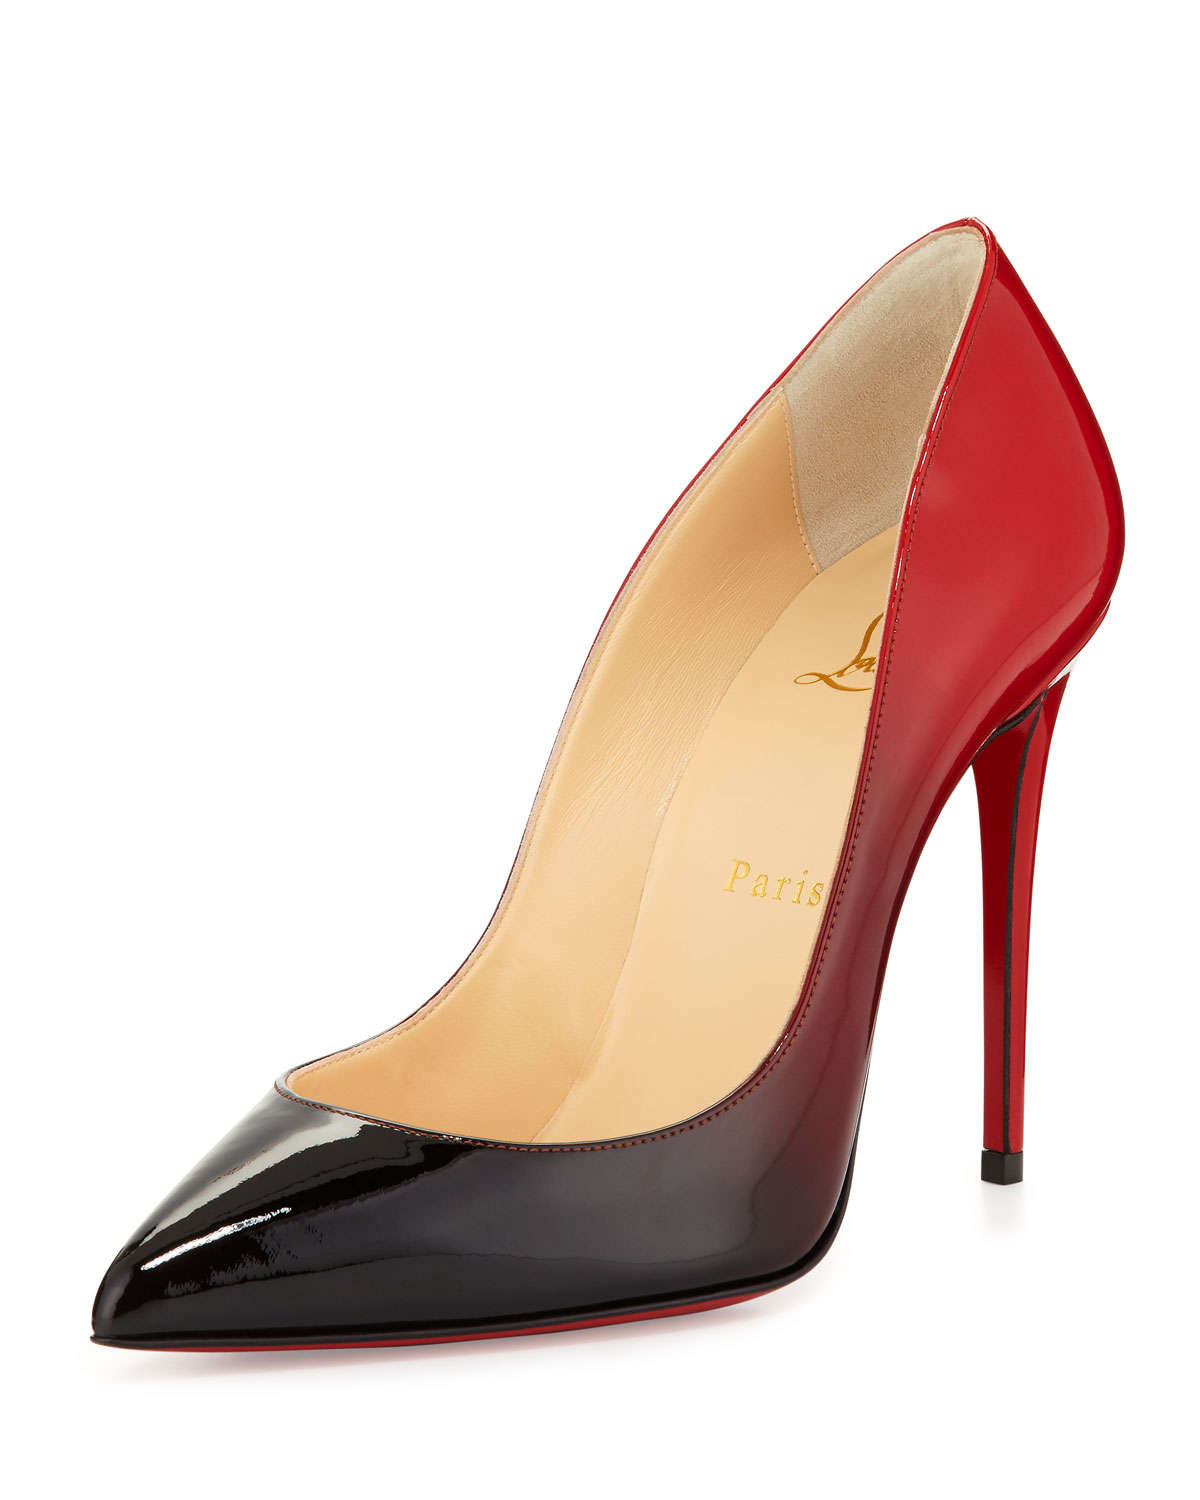 Lyst - Christian Louboutin Pigalle Follies Degrade Red Sole Pump in Black